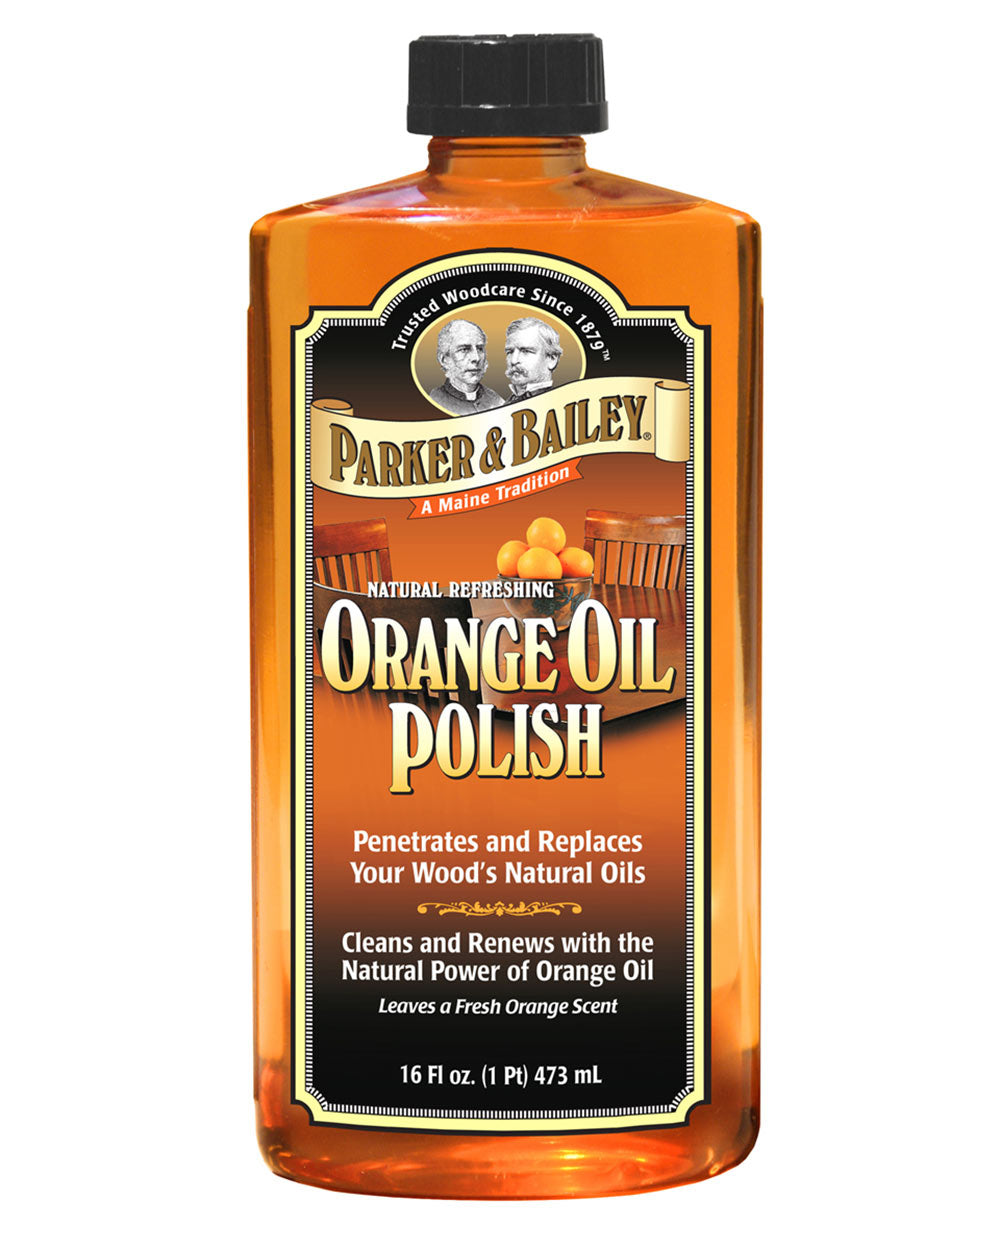 Parker and bailey orange oil polish scent on a white background